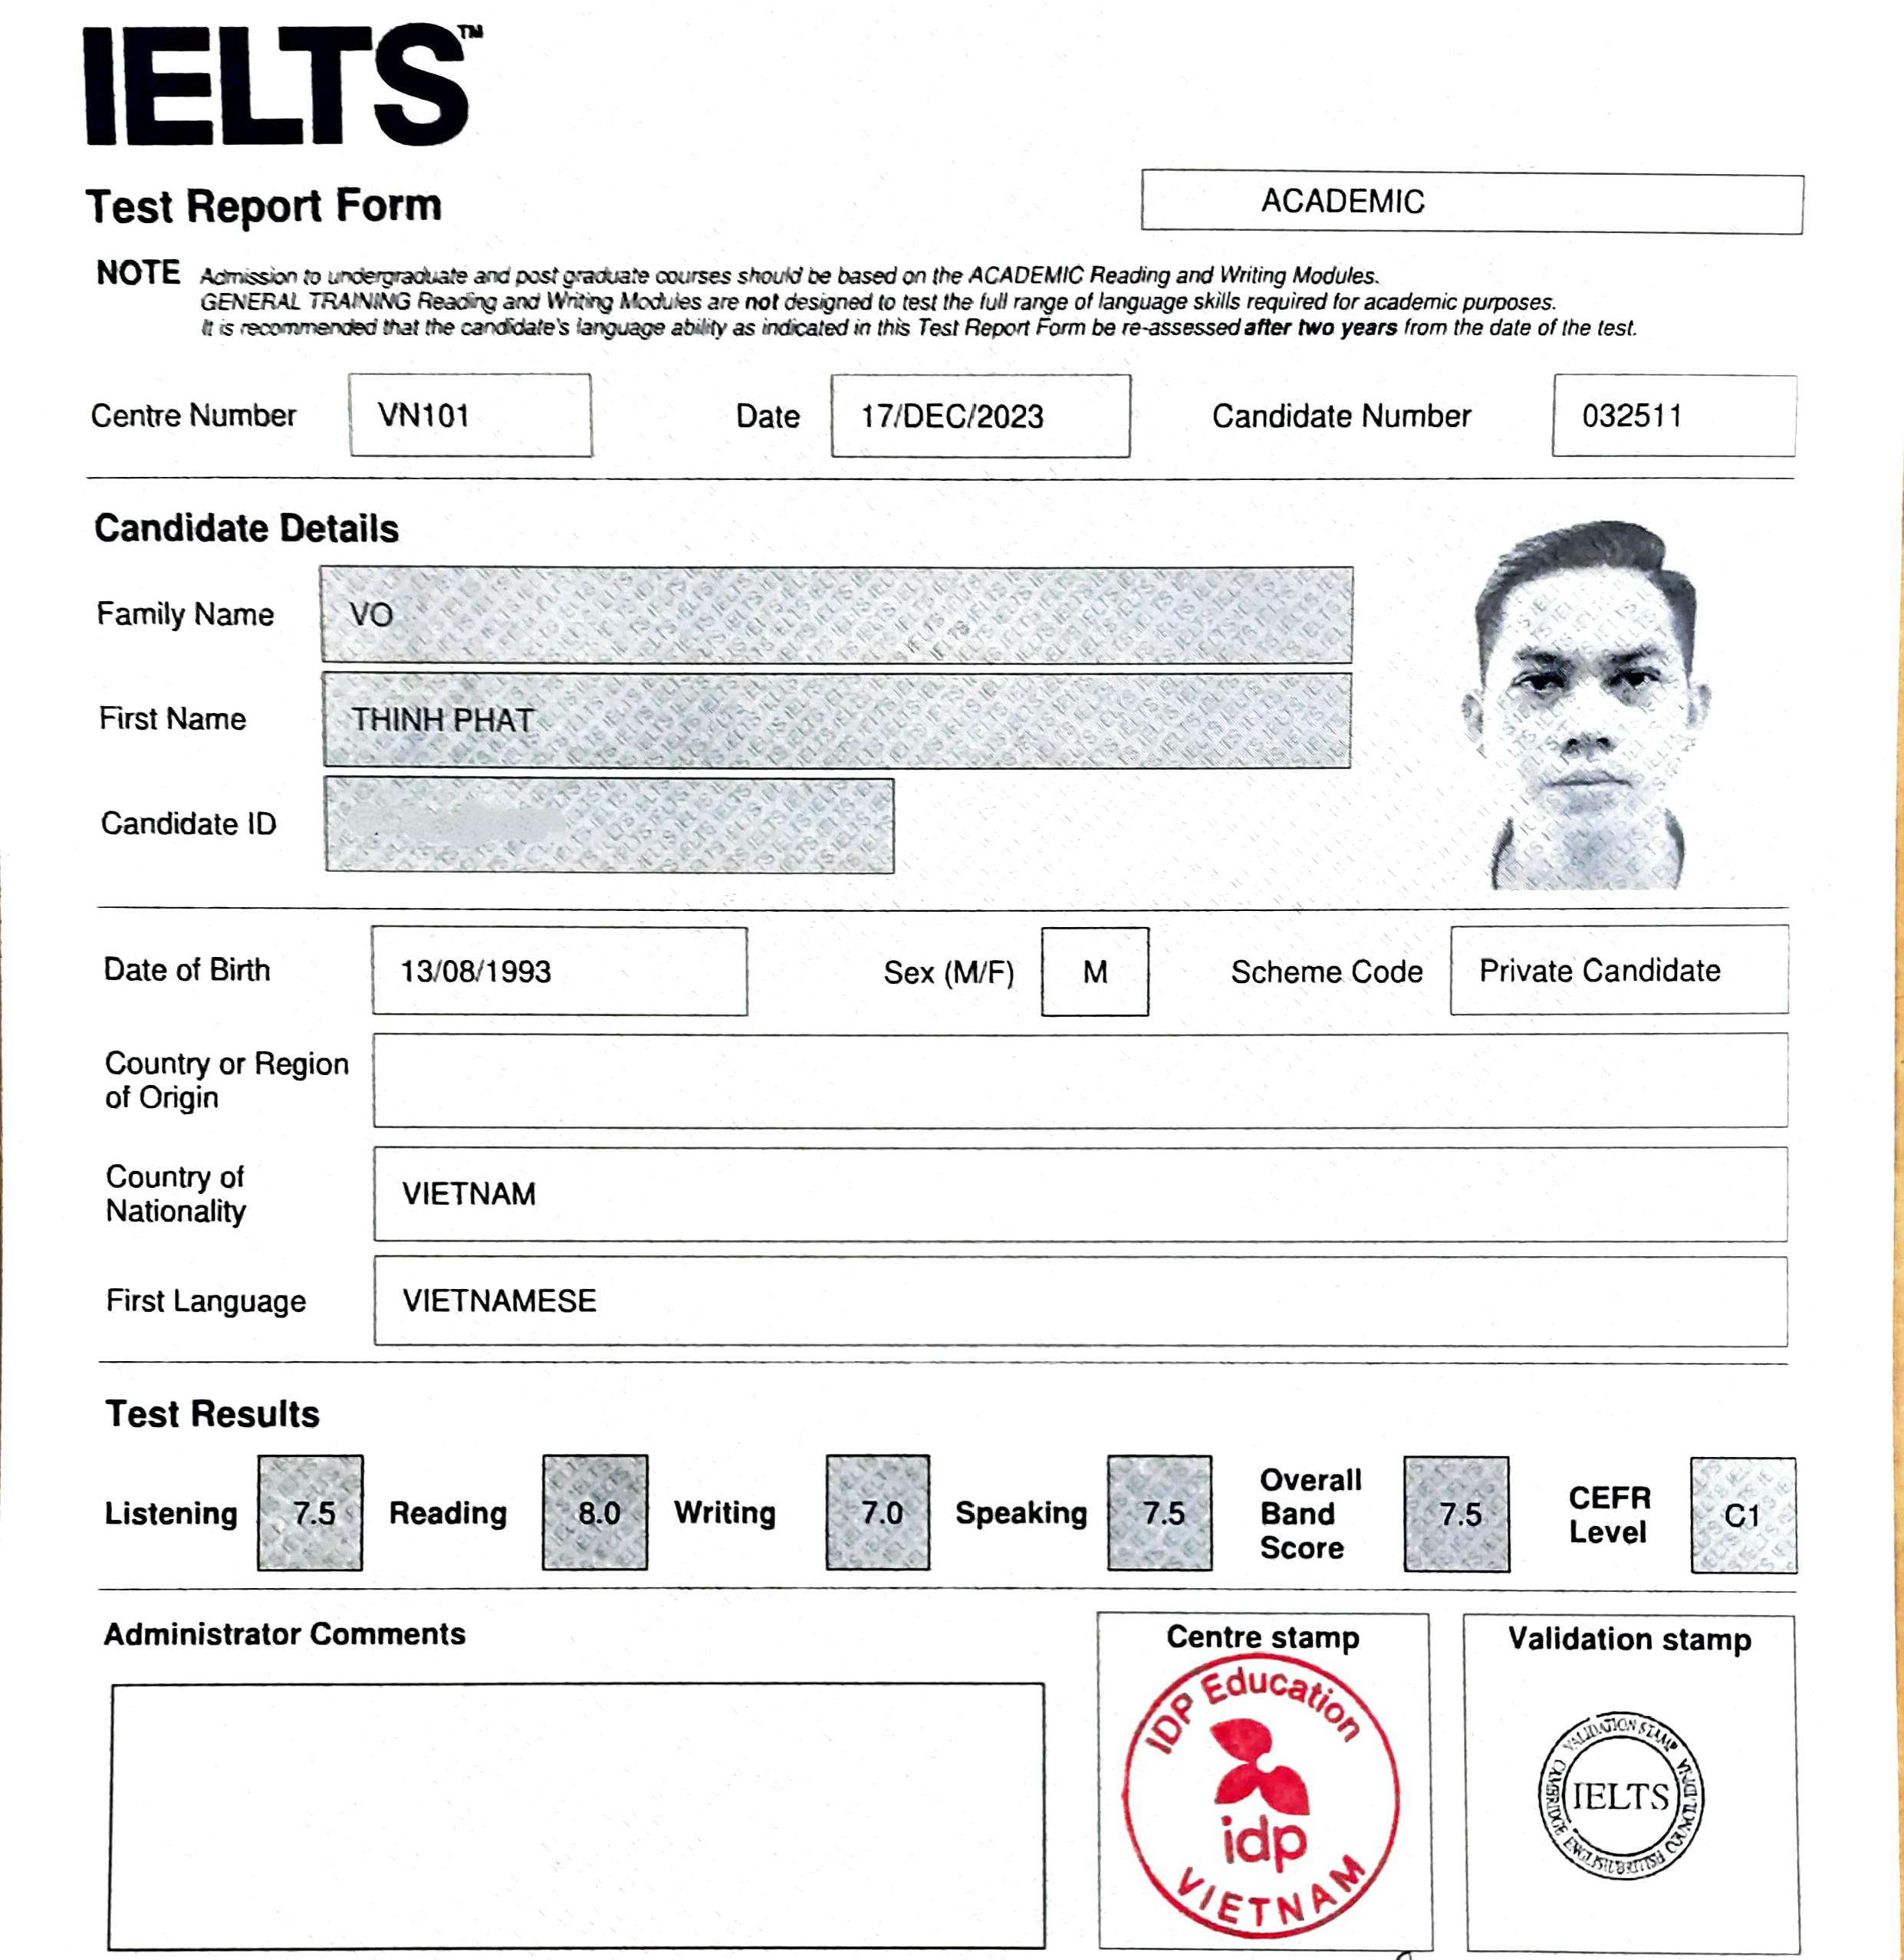 Vo Thinh Phat IELTS 7.5 (L7.5 R8.0 W7.0 S7.5) (ko ID)(cropped).png